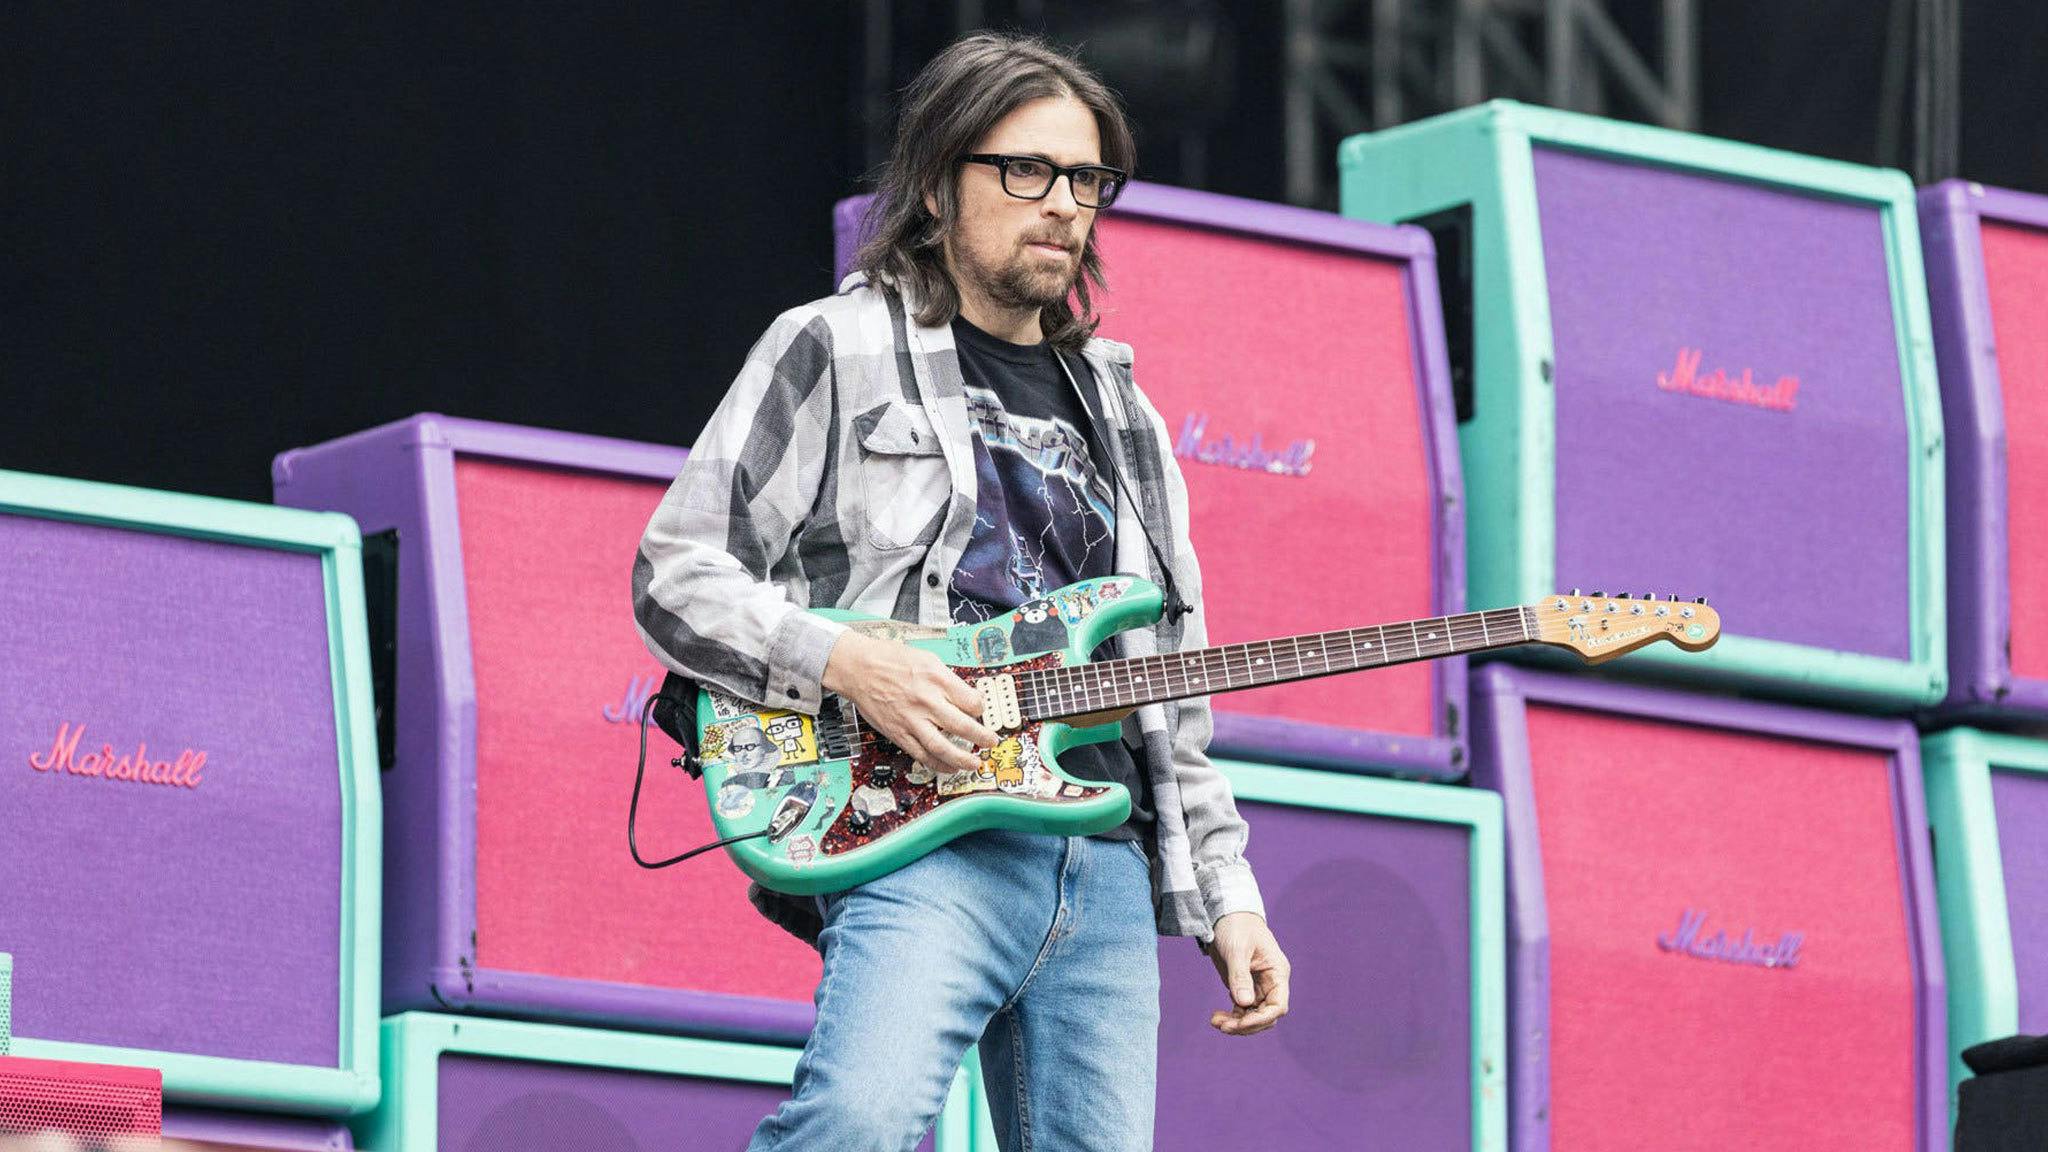 Weezer frontman Rivers Cuomo’s Harvard classmates didn’t realise who he was: “Minds were blown”